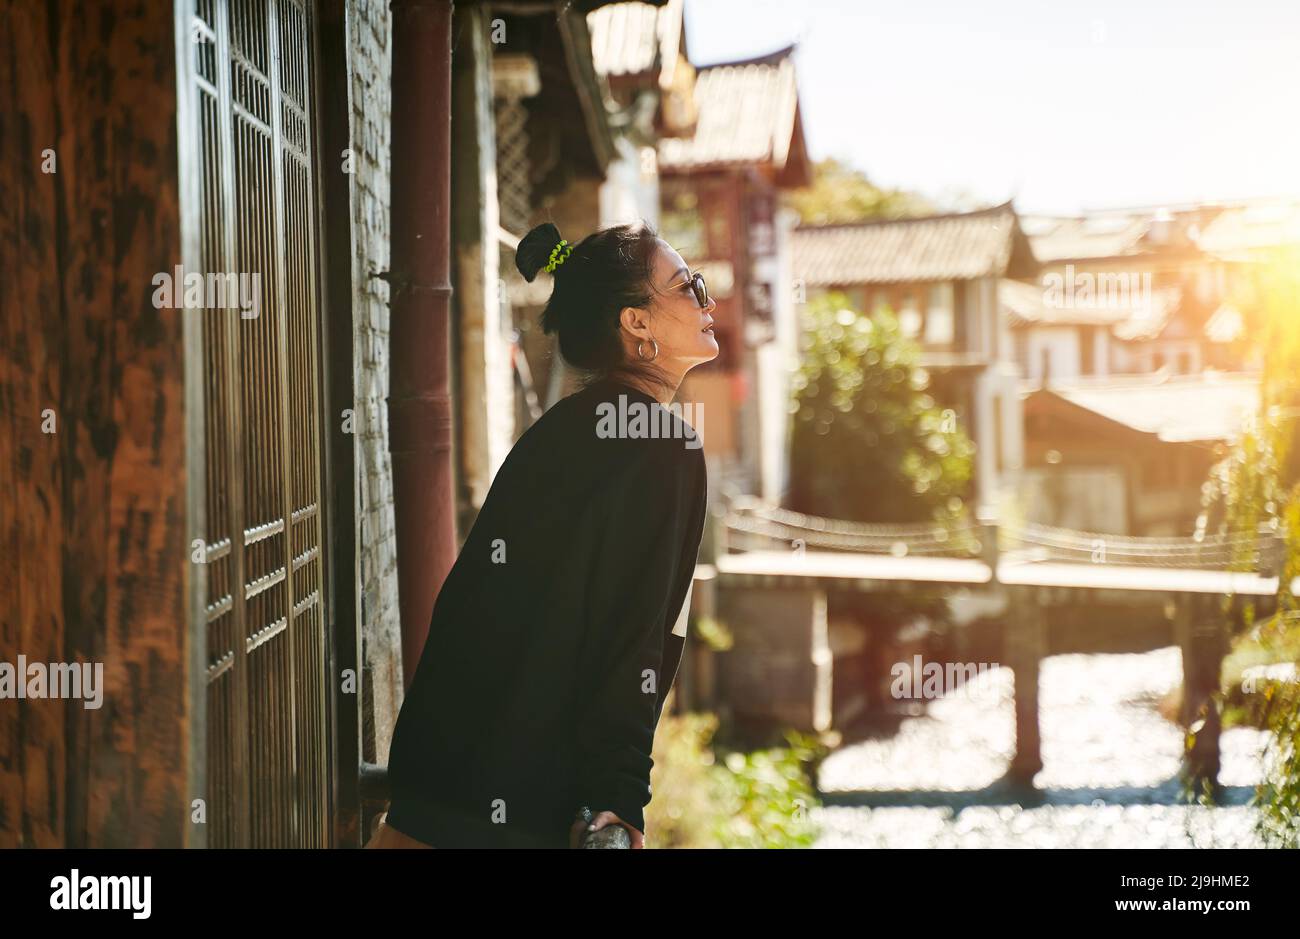 asian woman relaxing and enjoying sunlight outside of a traditional wooden house Stock Photo